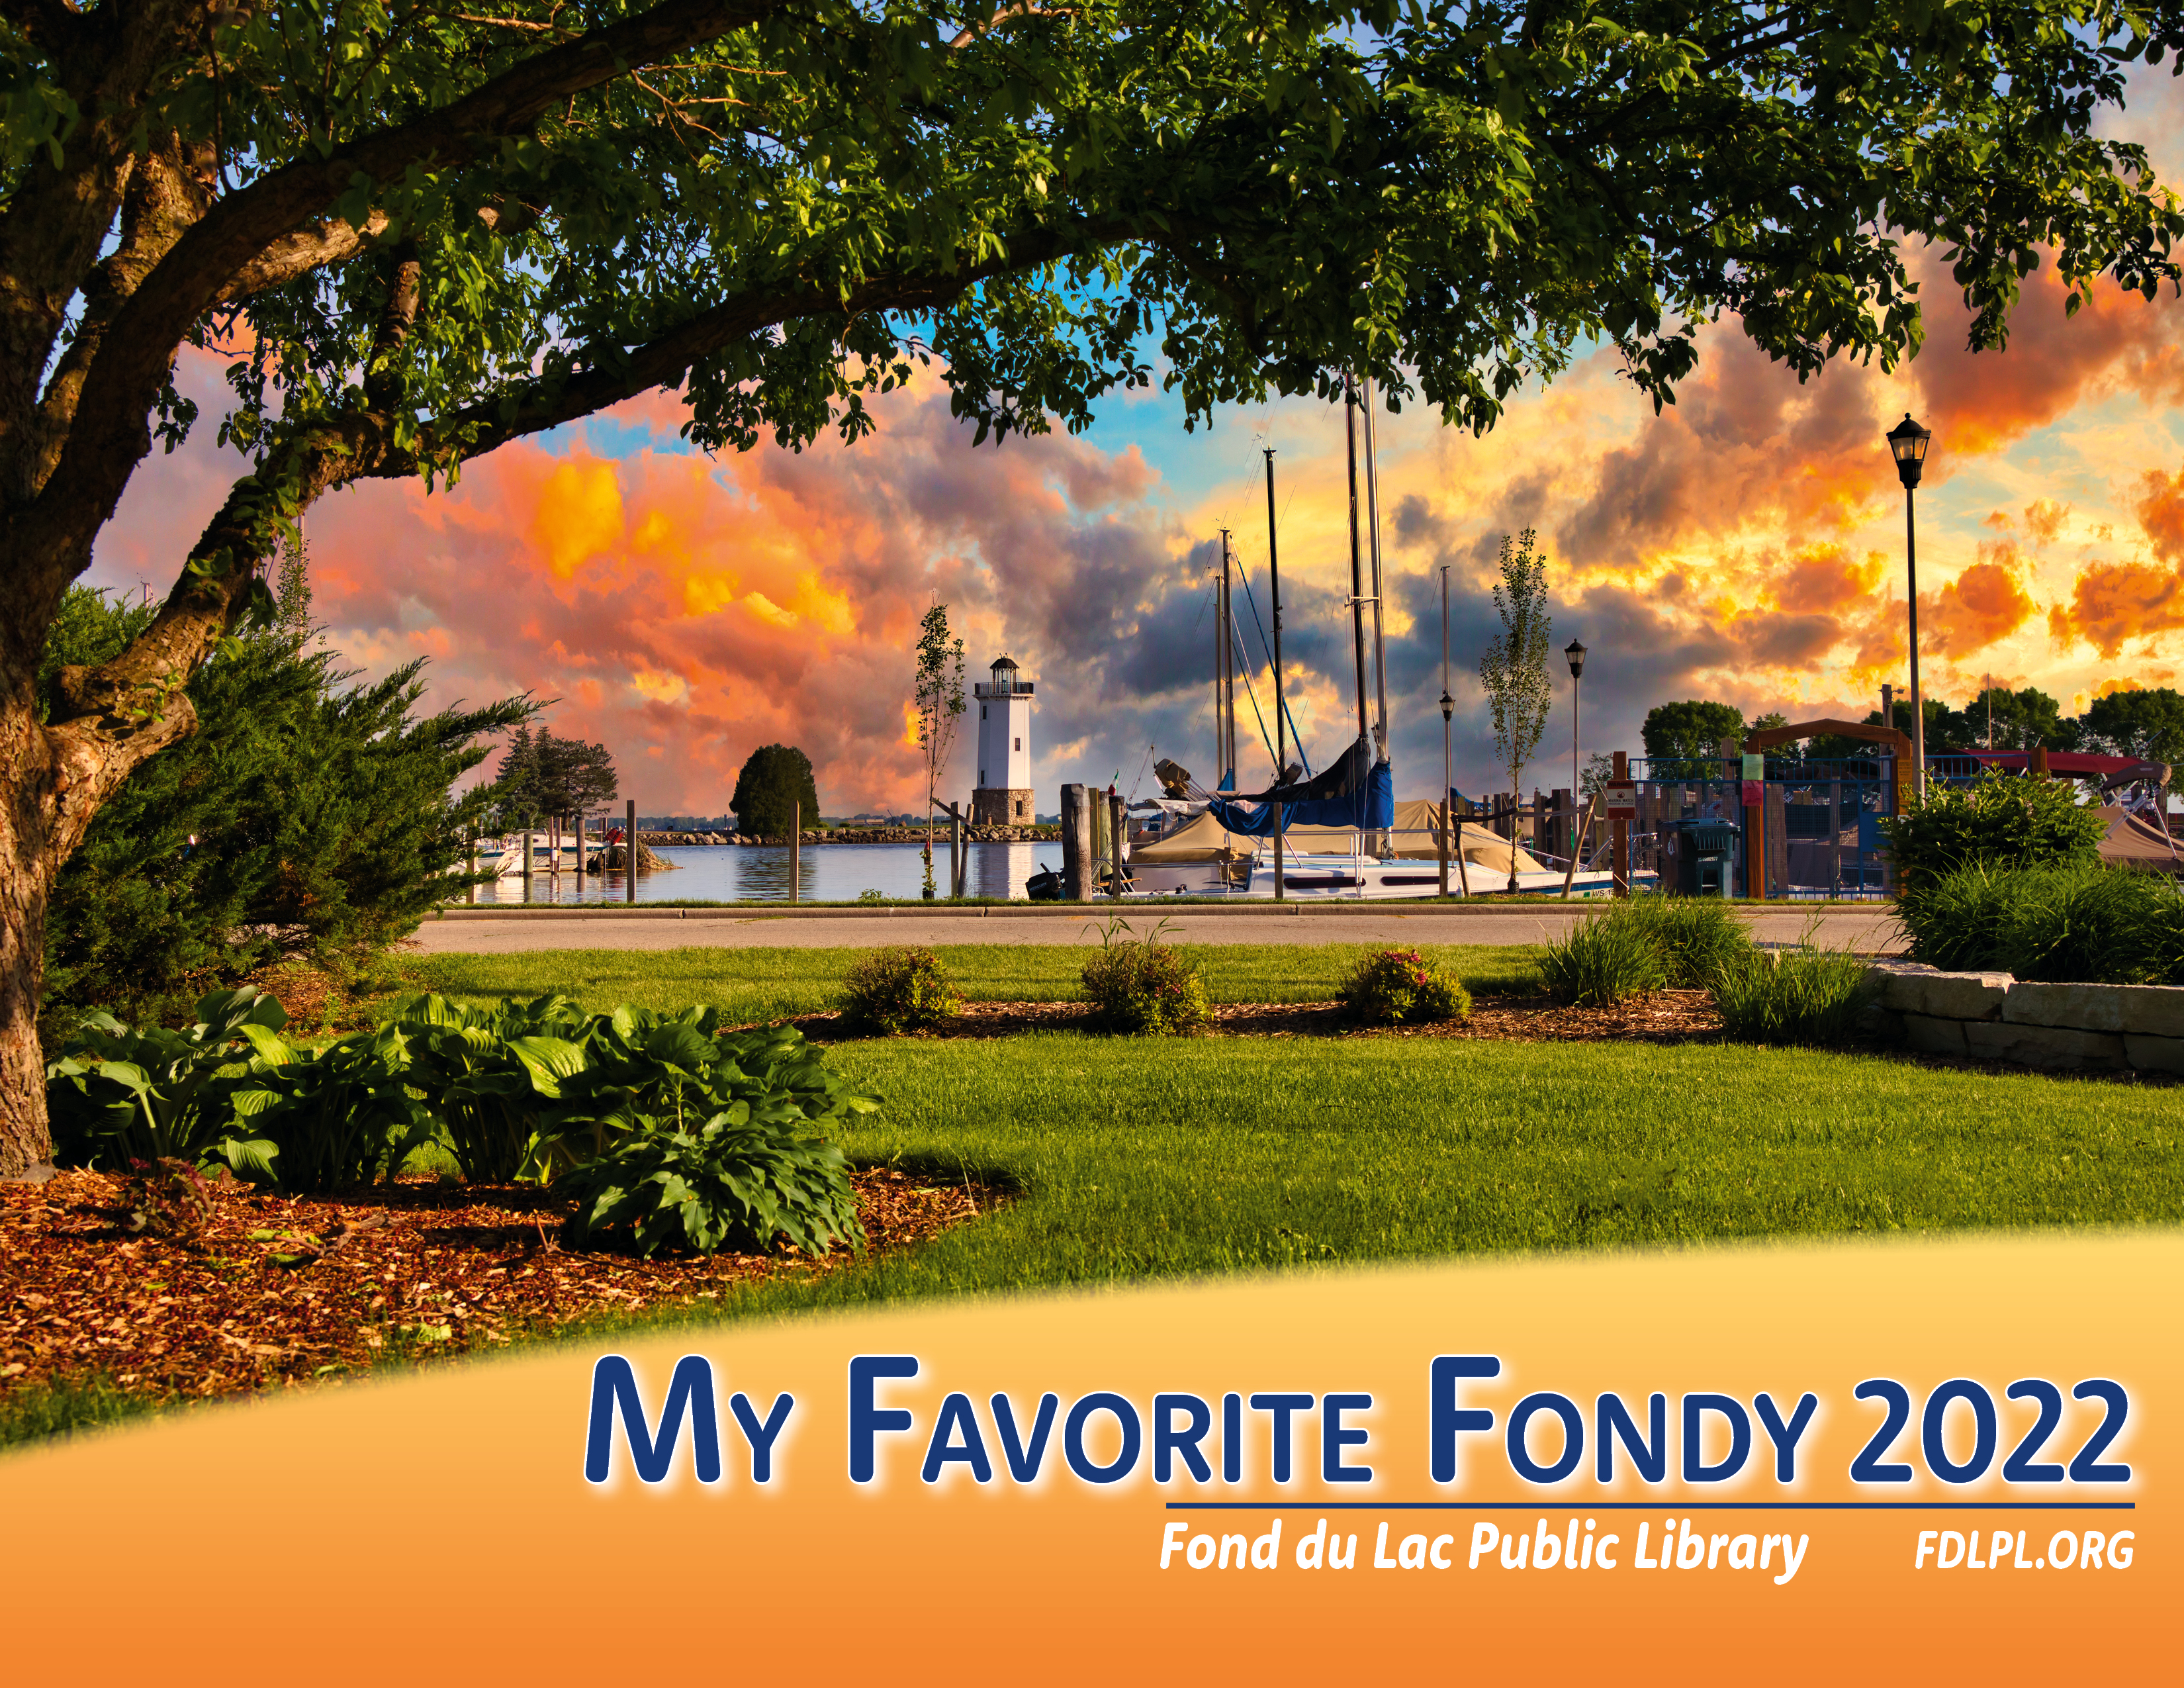 My Favorite Fondy 2022 calendars now are on sale